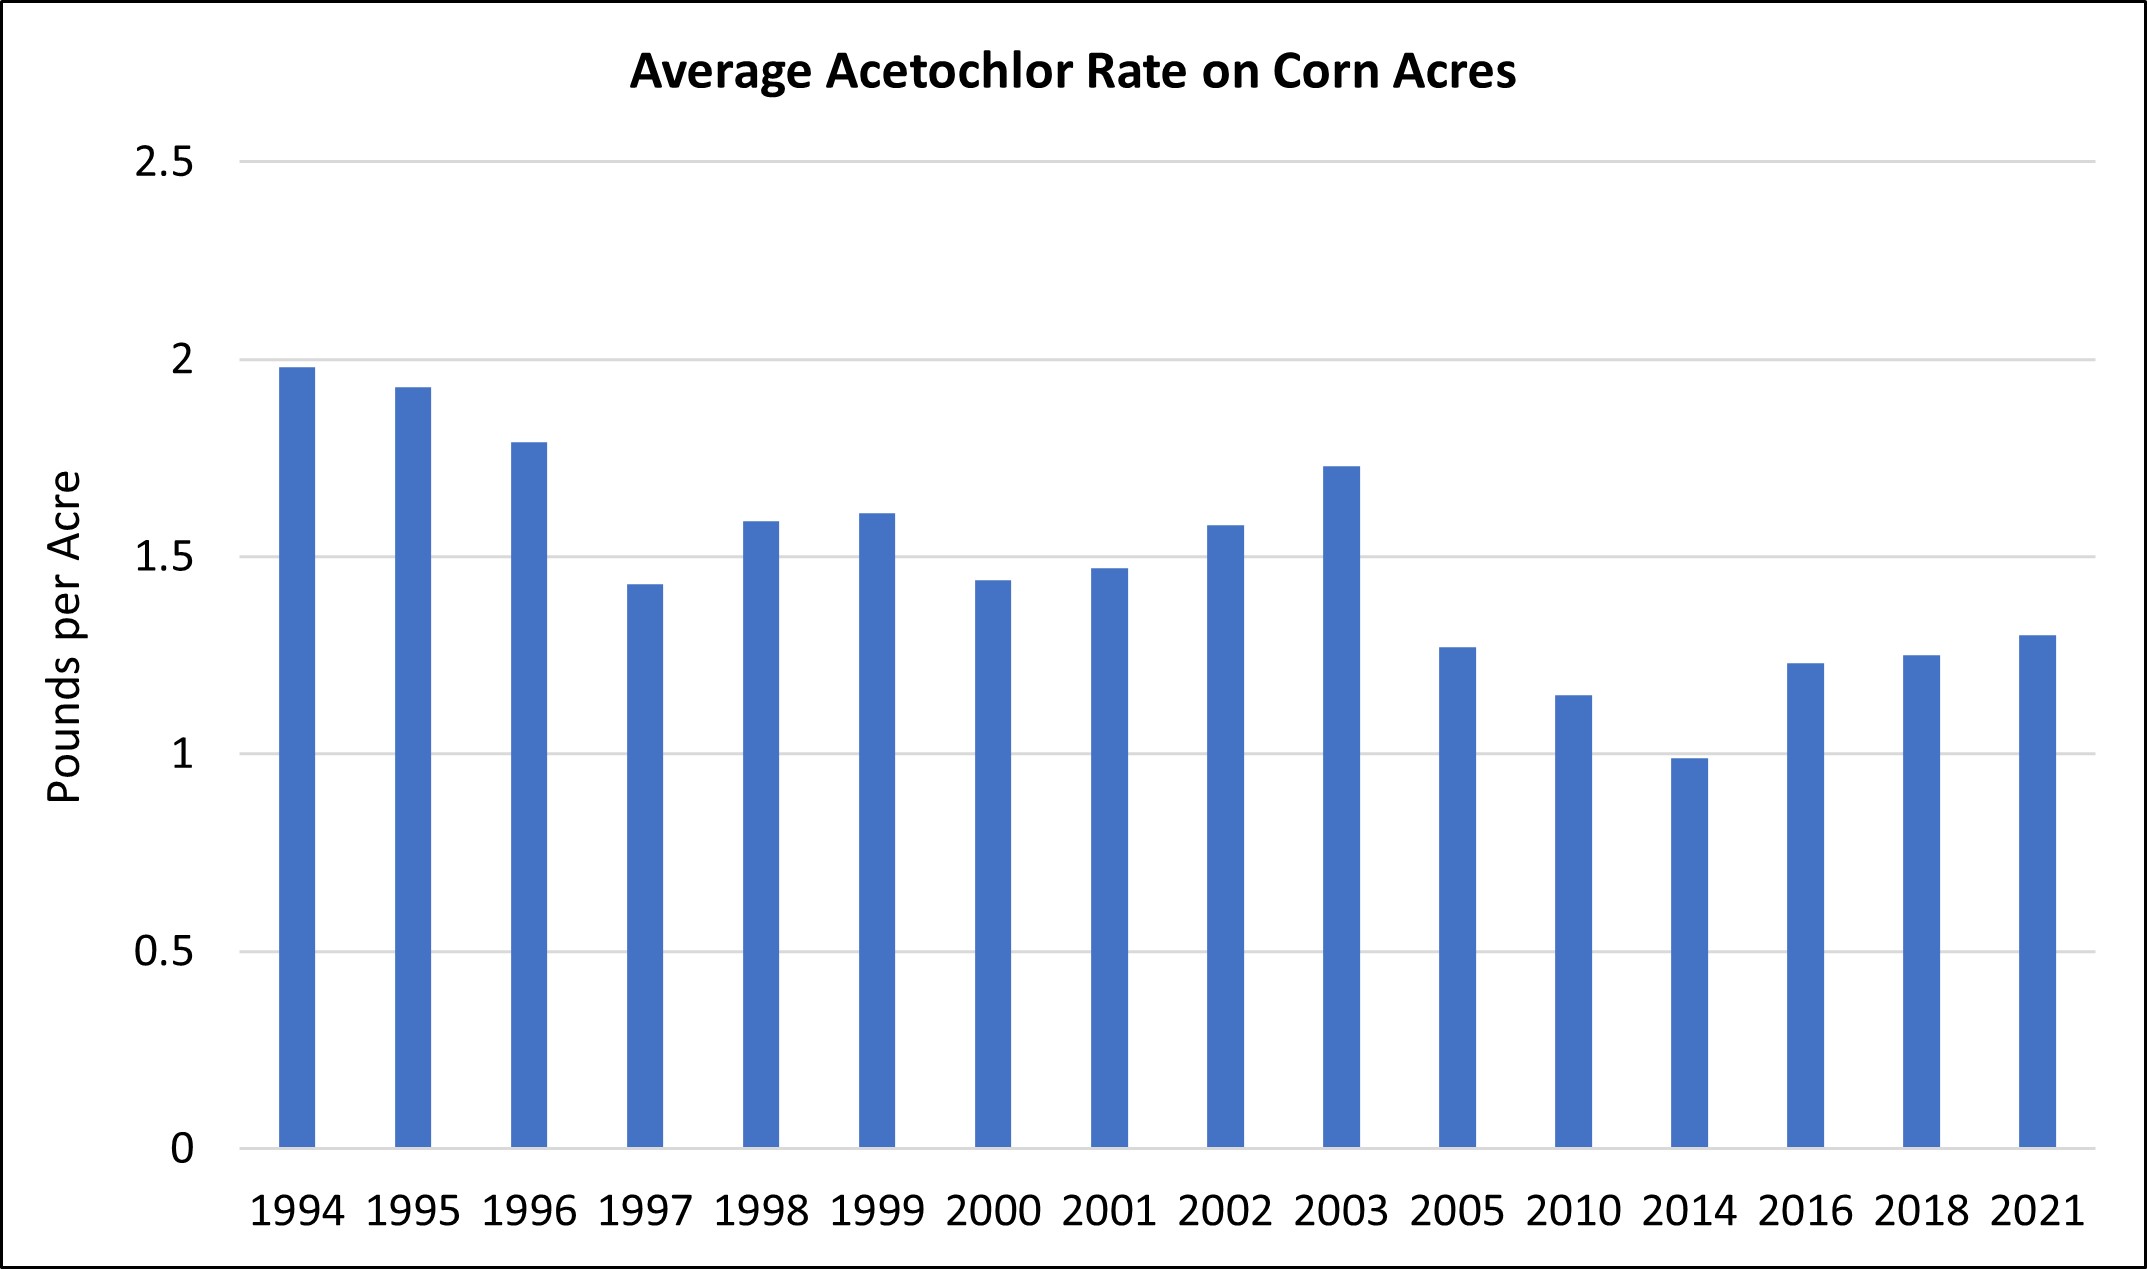 Bar graph illustrating the average rate of acetochlor applied to corn. The rate varied between 1 and 2 pounds per acre on corn acres from 1994 through 2021 according to the National Agricultural Statistics Service.